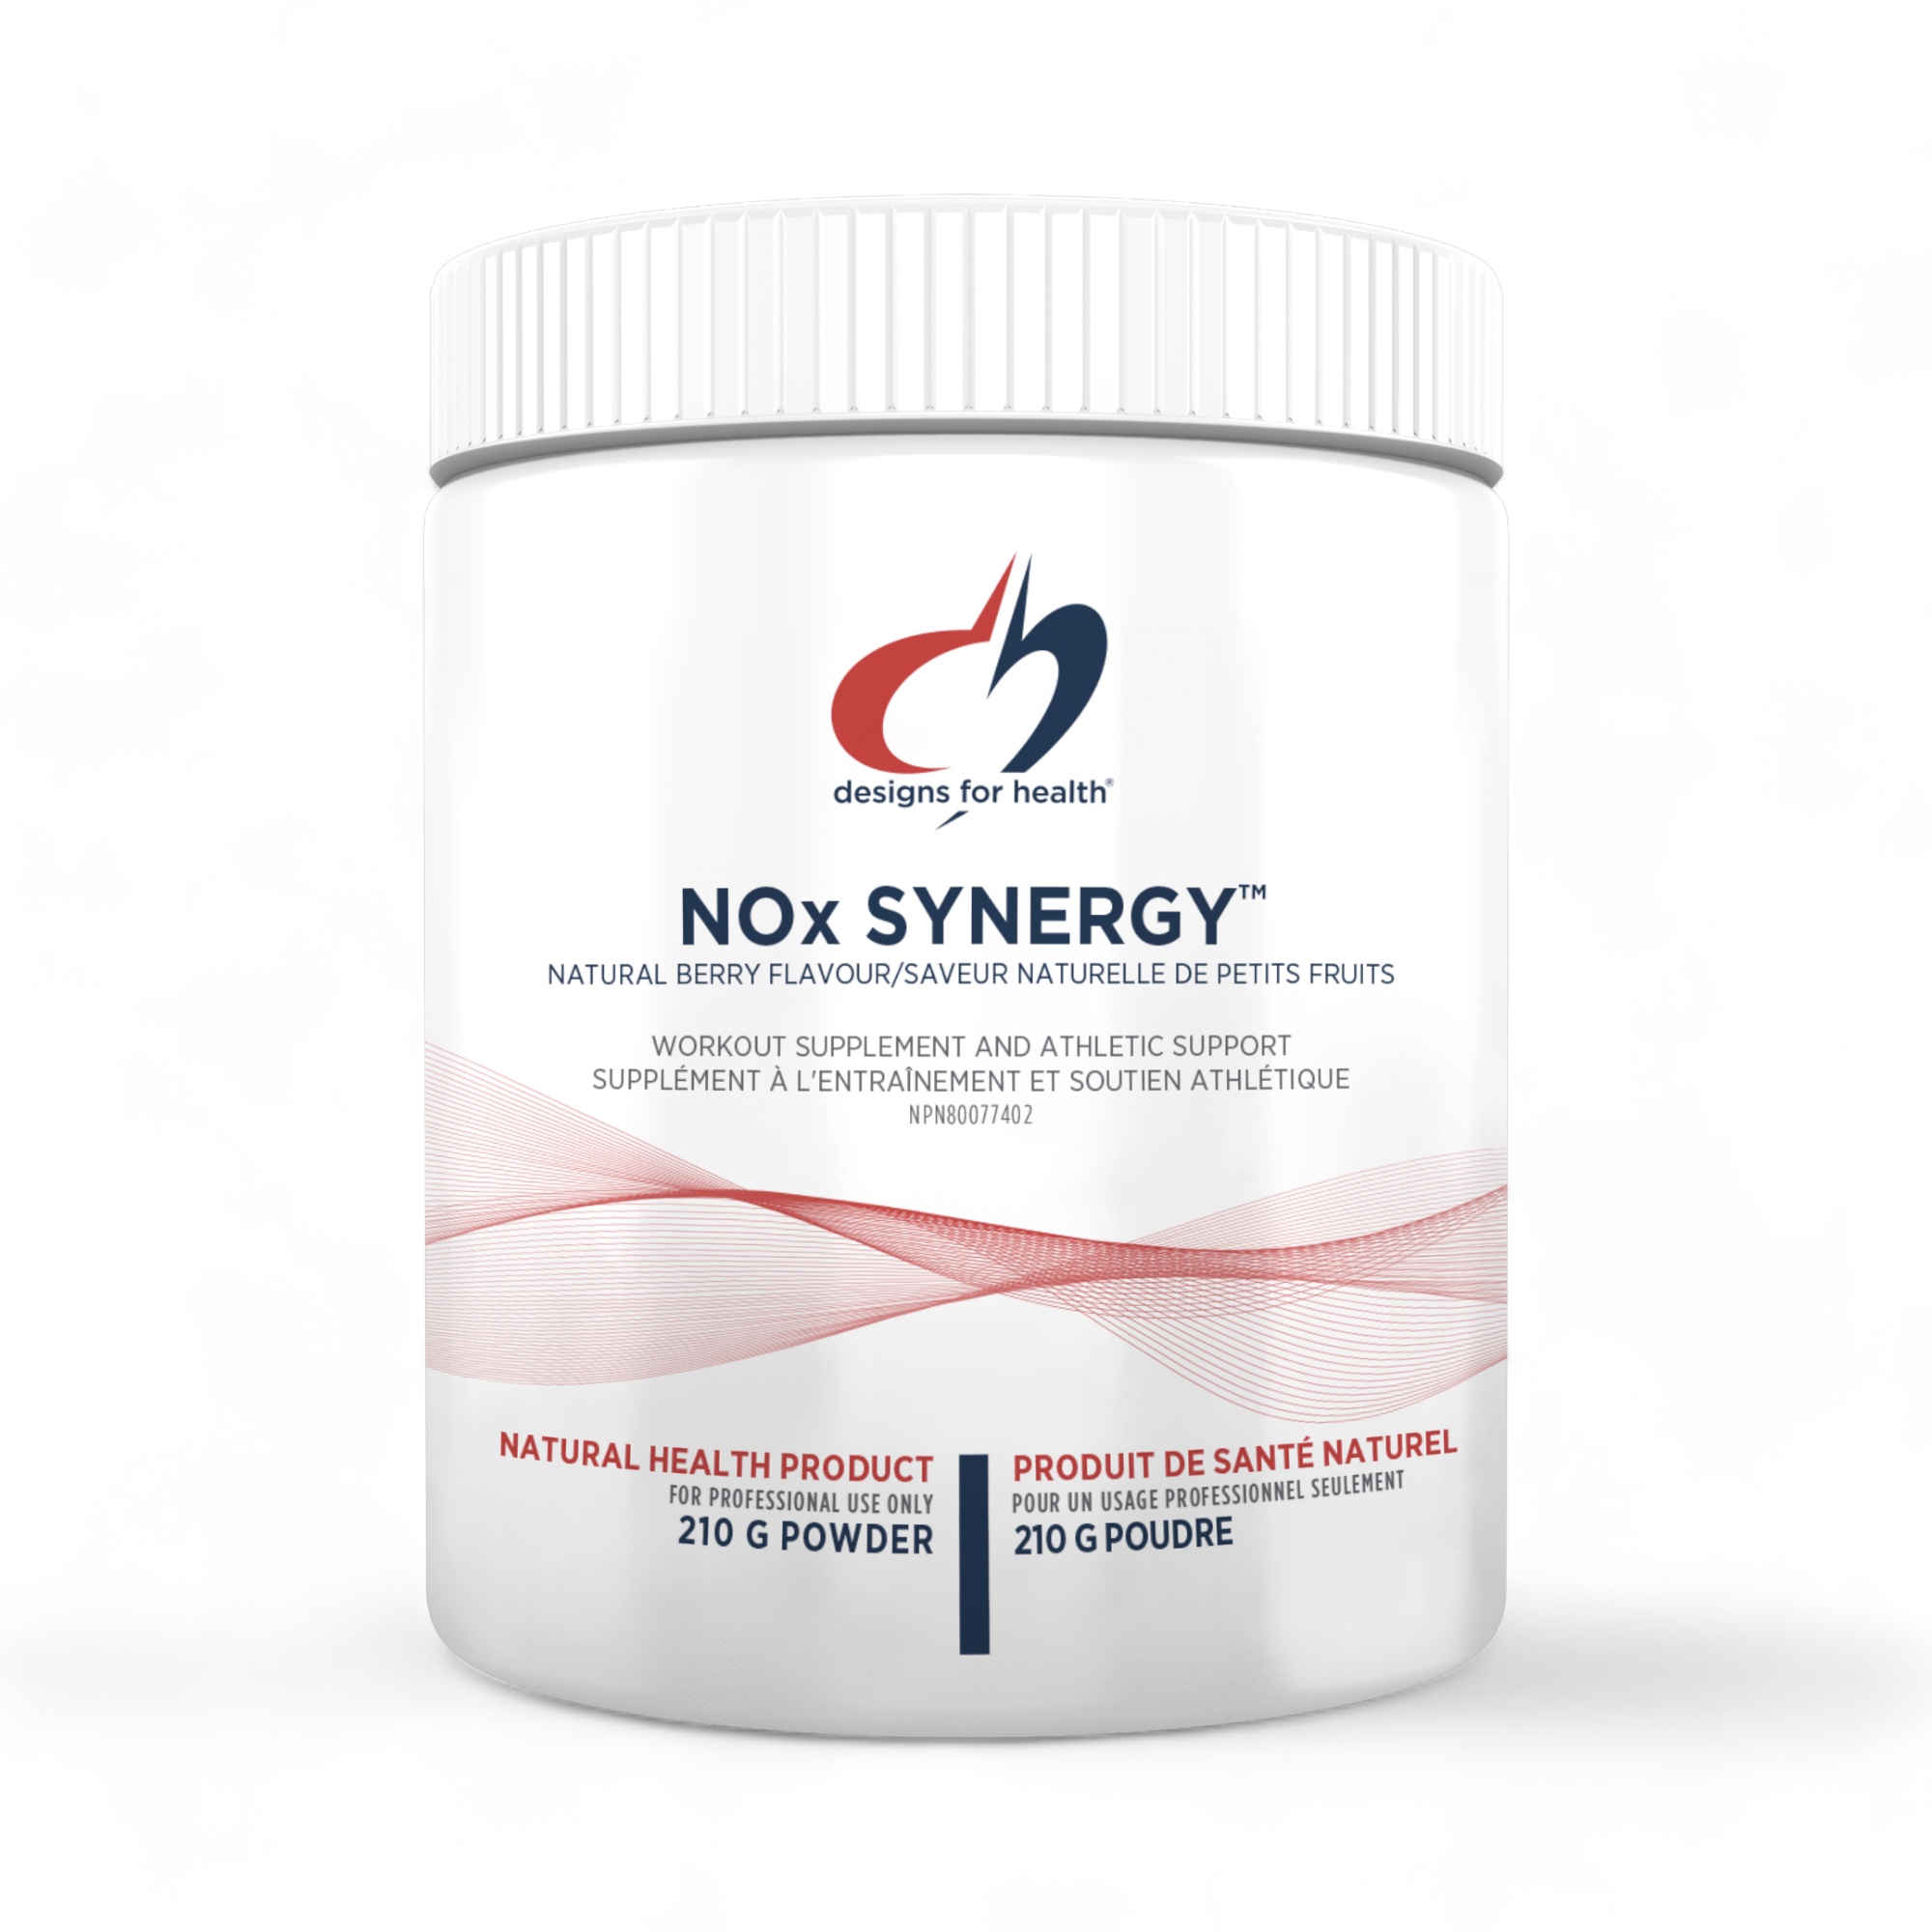 NOx Synergy™ poudre 210 g Designs for Health